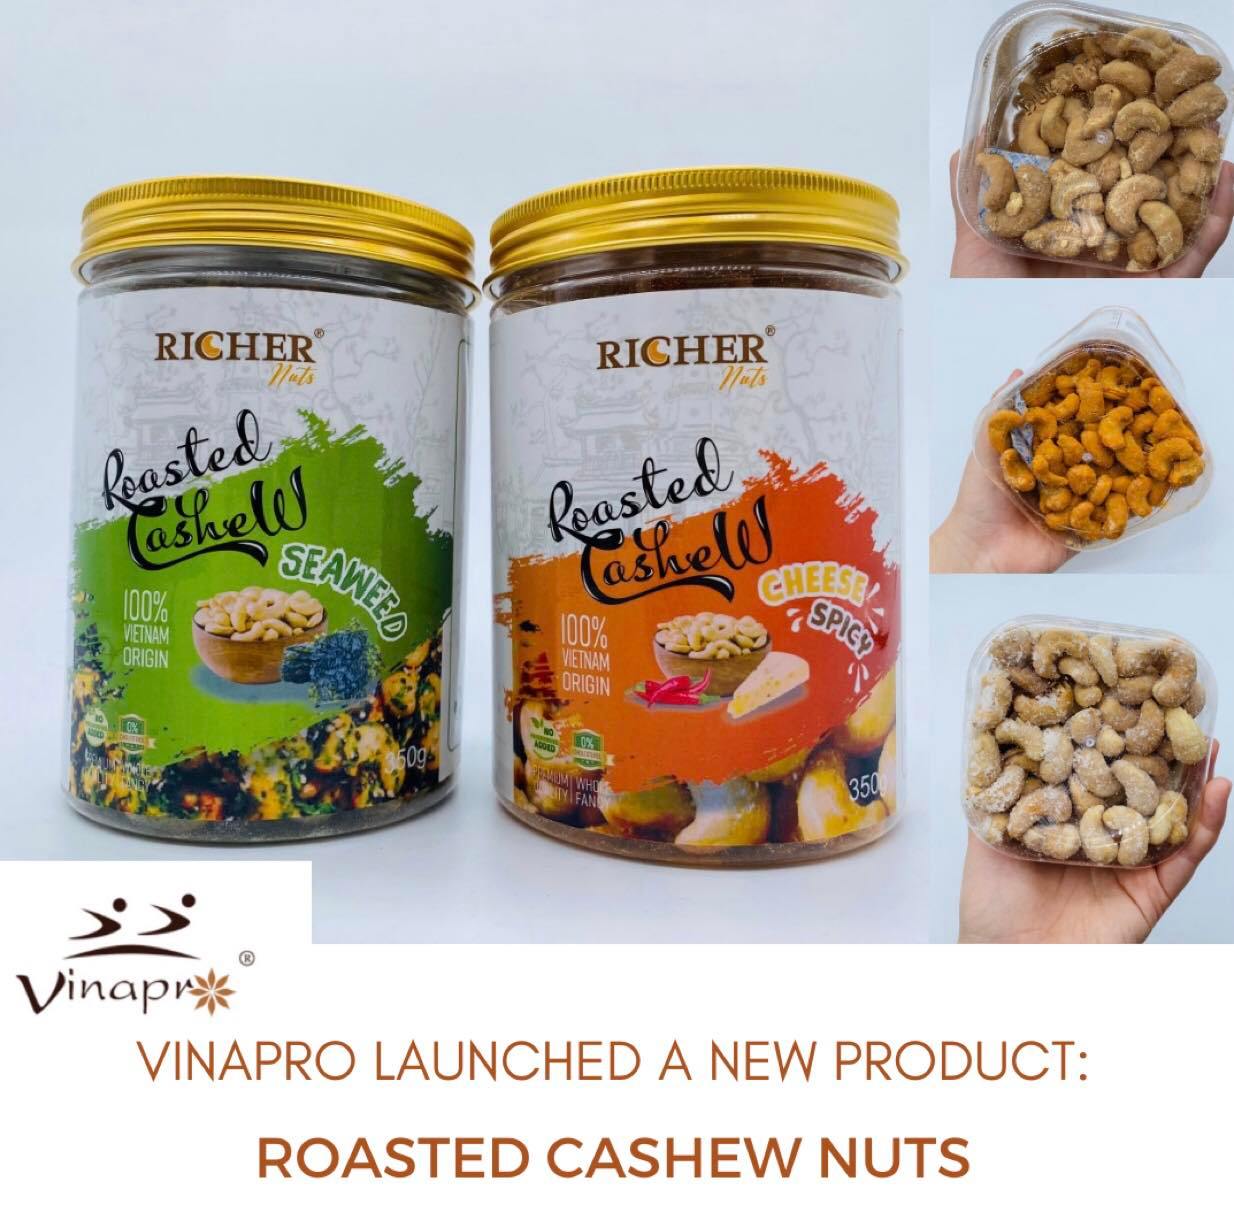 VINAPRO LAUNCHED A NEW PRODUCT: ROASTED CASHEW NUTS